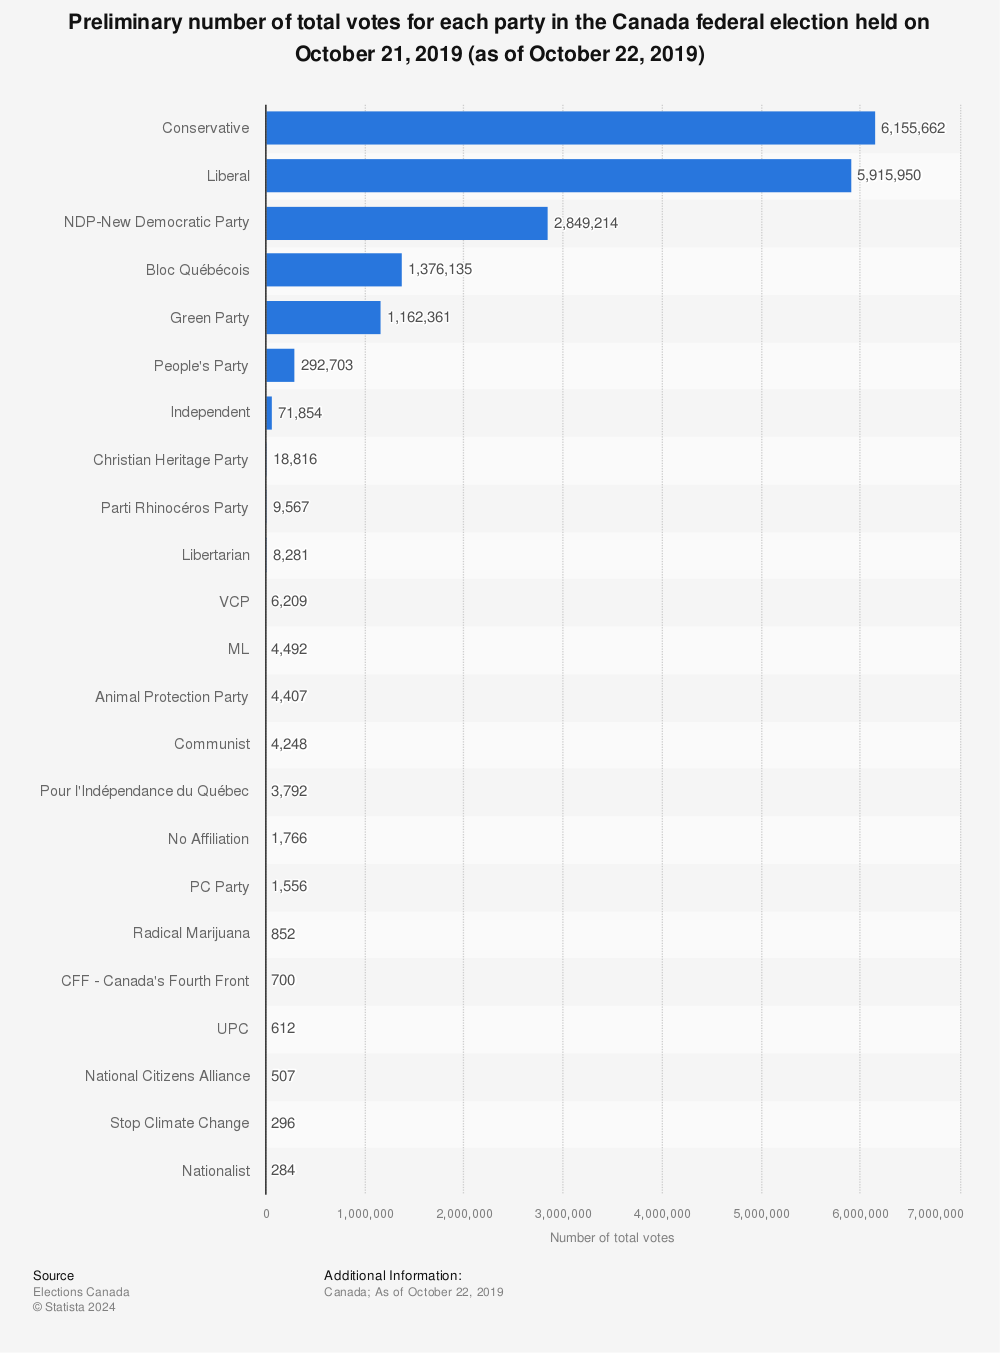 Statistic: Preliminary number of total votes for each party in the Canada federal election held on October 21, 2019 (as of October 22, 2019) | Statista